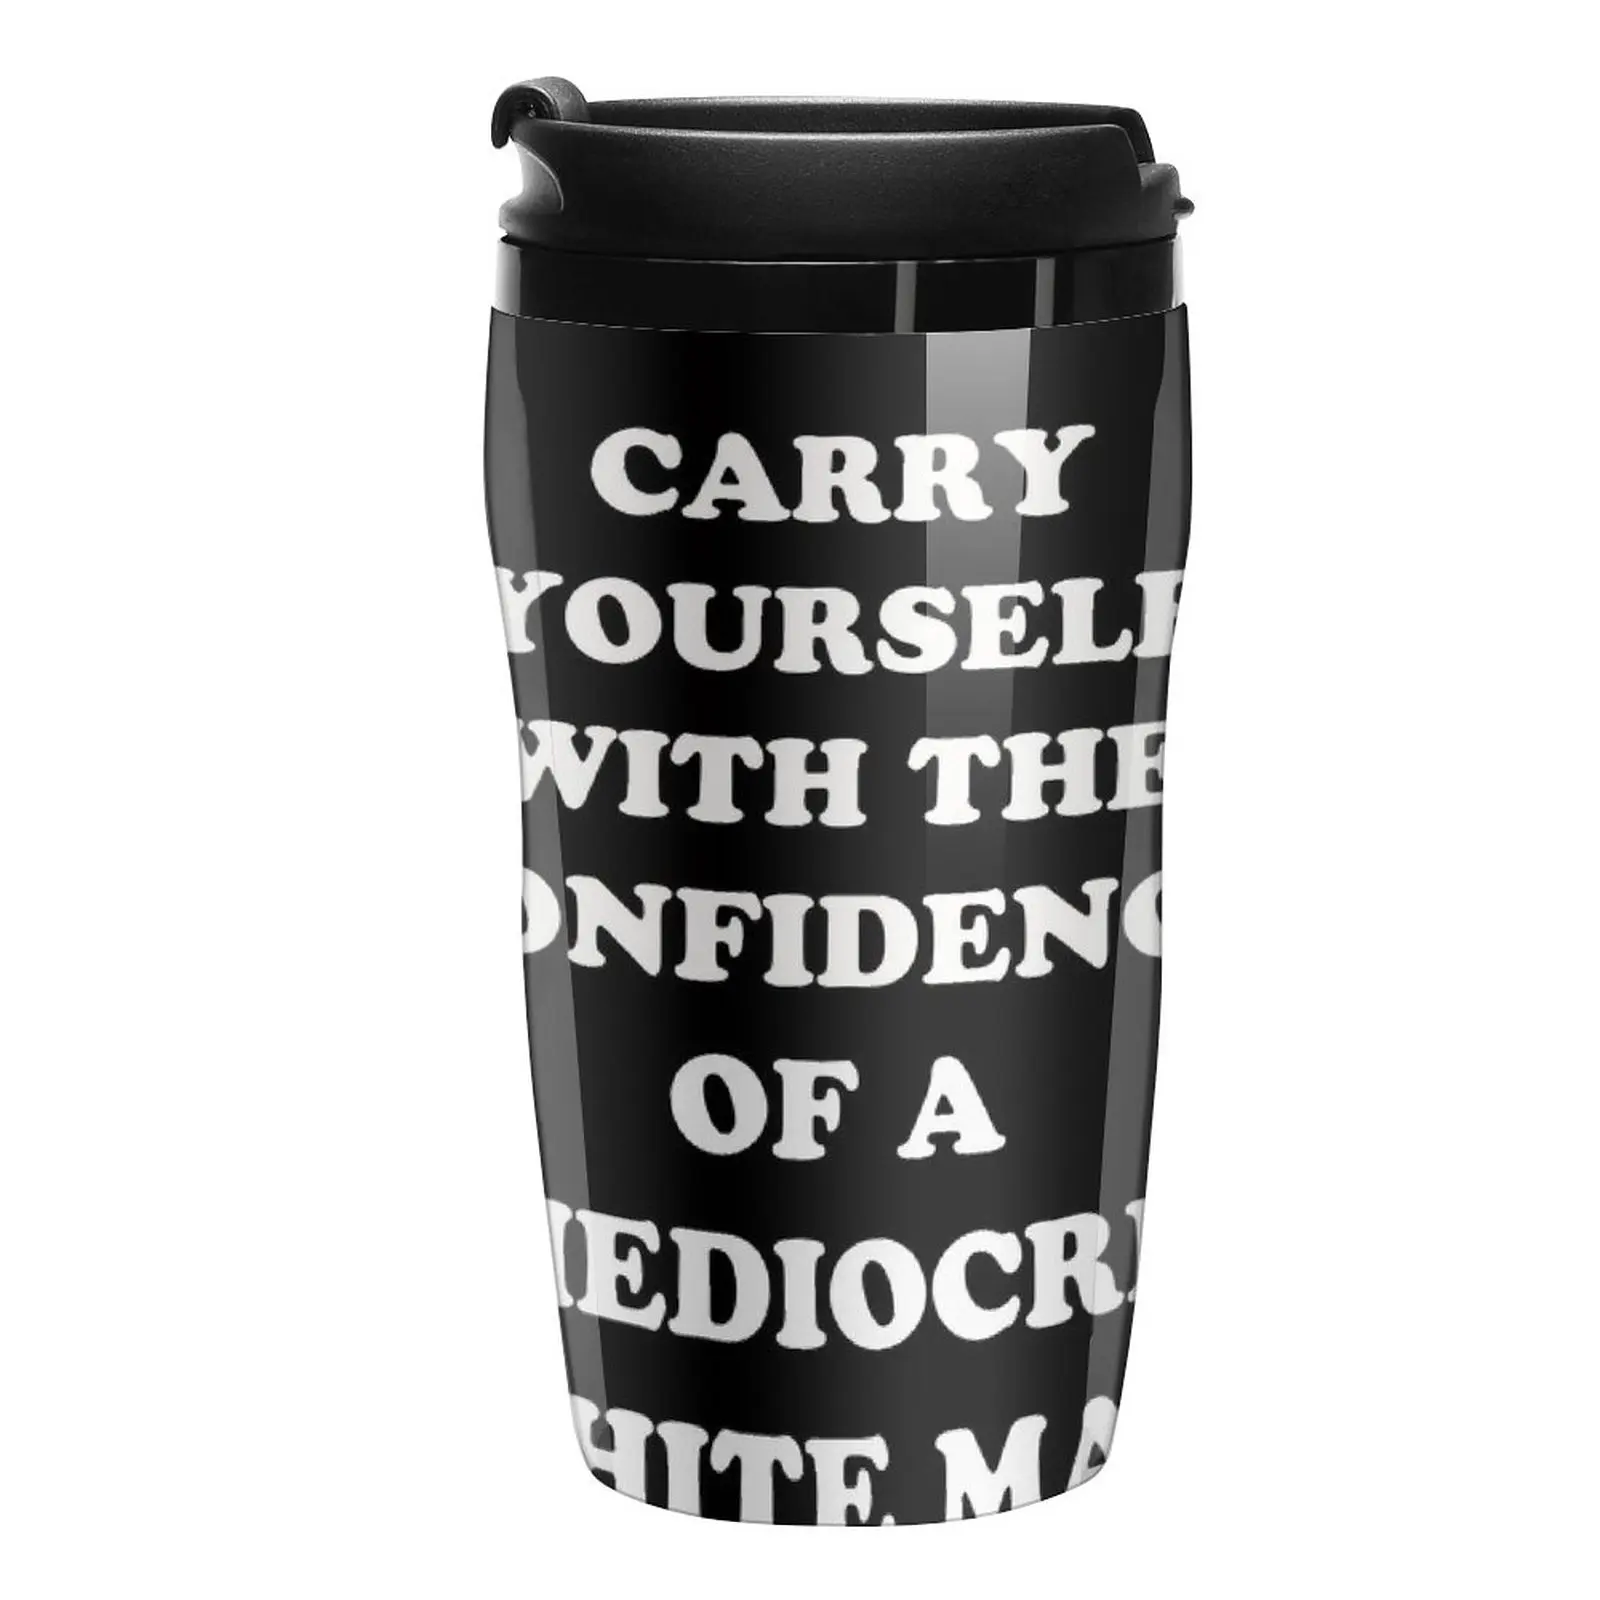 

New Carry Yourself With Confidence Mediocre White Man Travel Coffee Mug Mug Coffee Cup Coffee Cup To Go